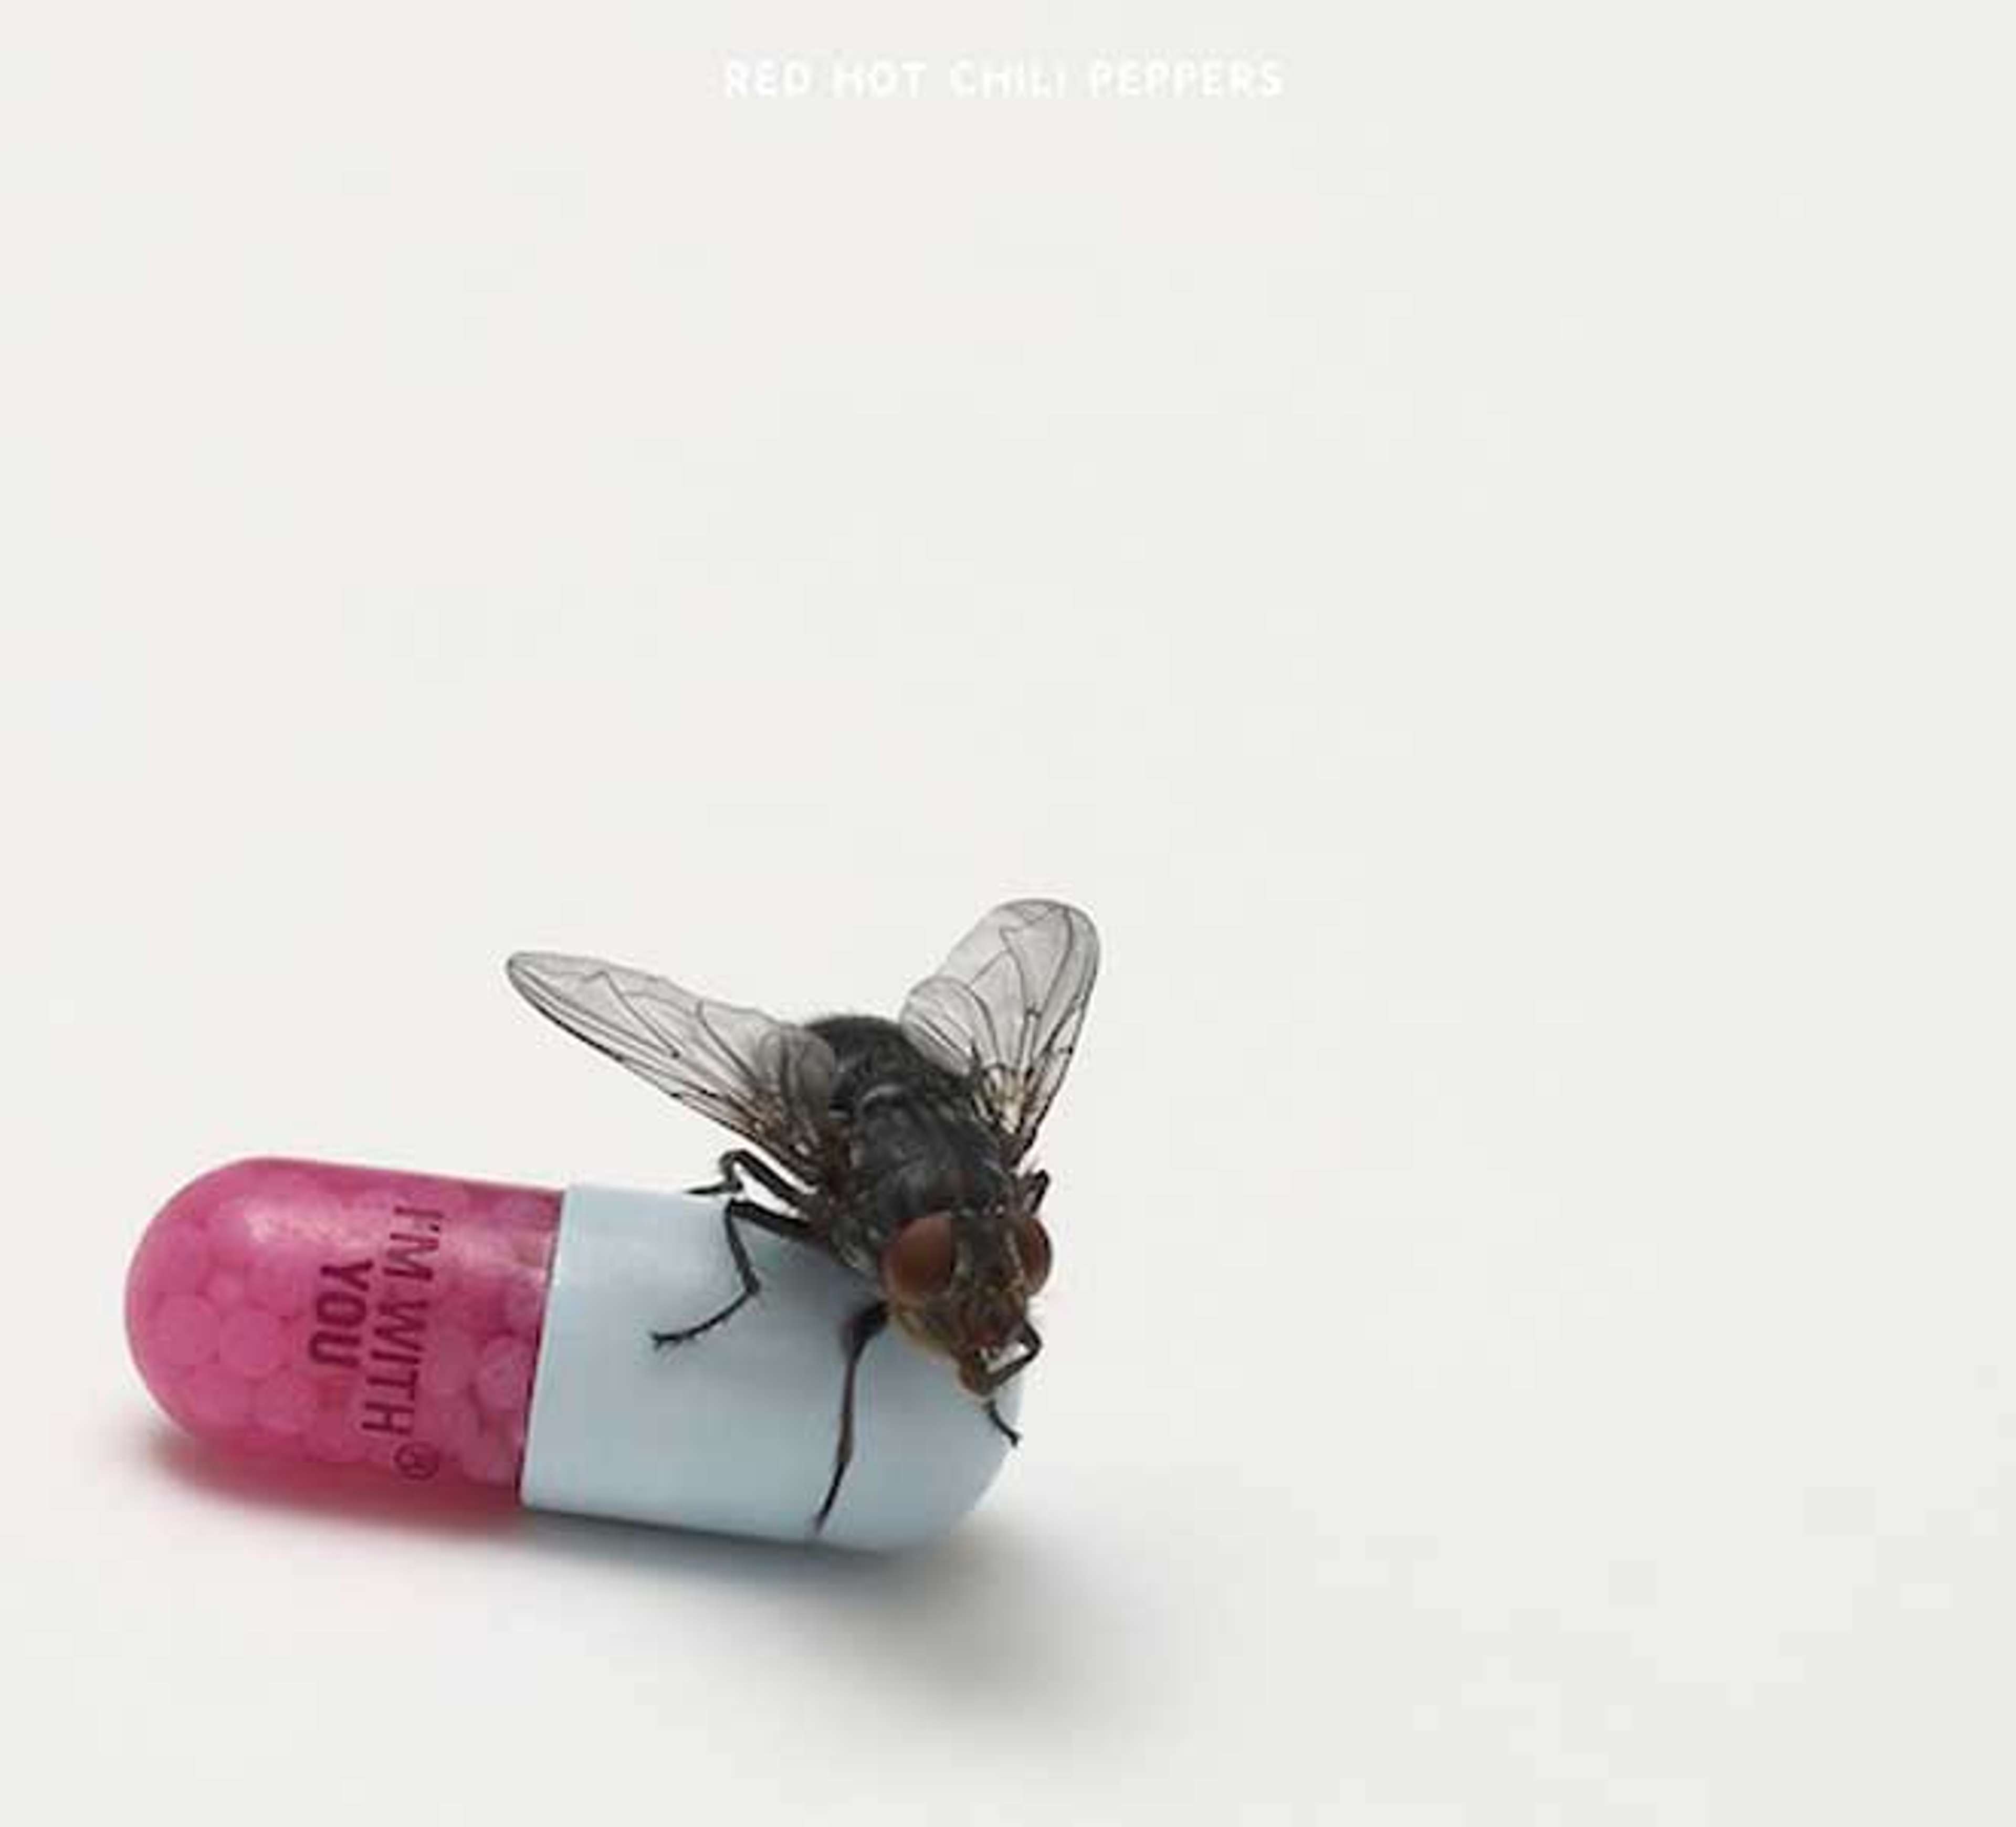 An image of the album cover for I’m With You by Damien Hirst, showing an image of a fly perched on a pill capsule inscribed with the album’s title.